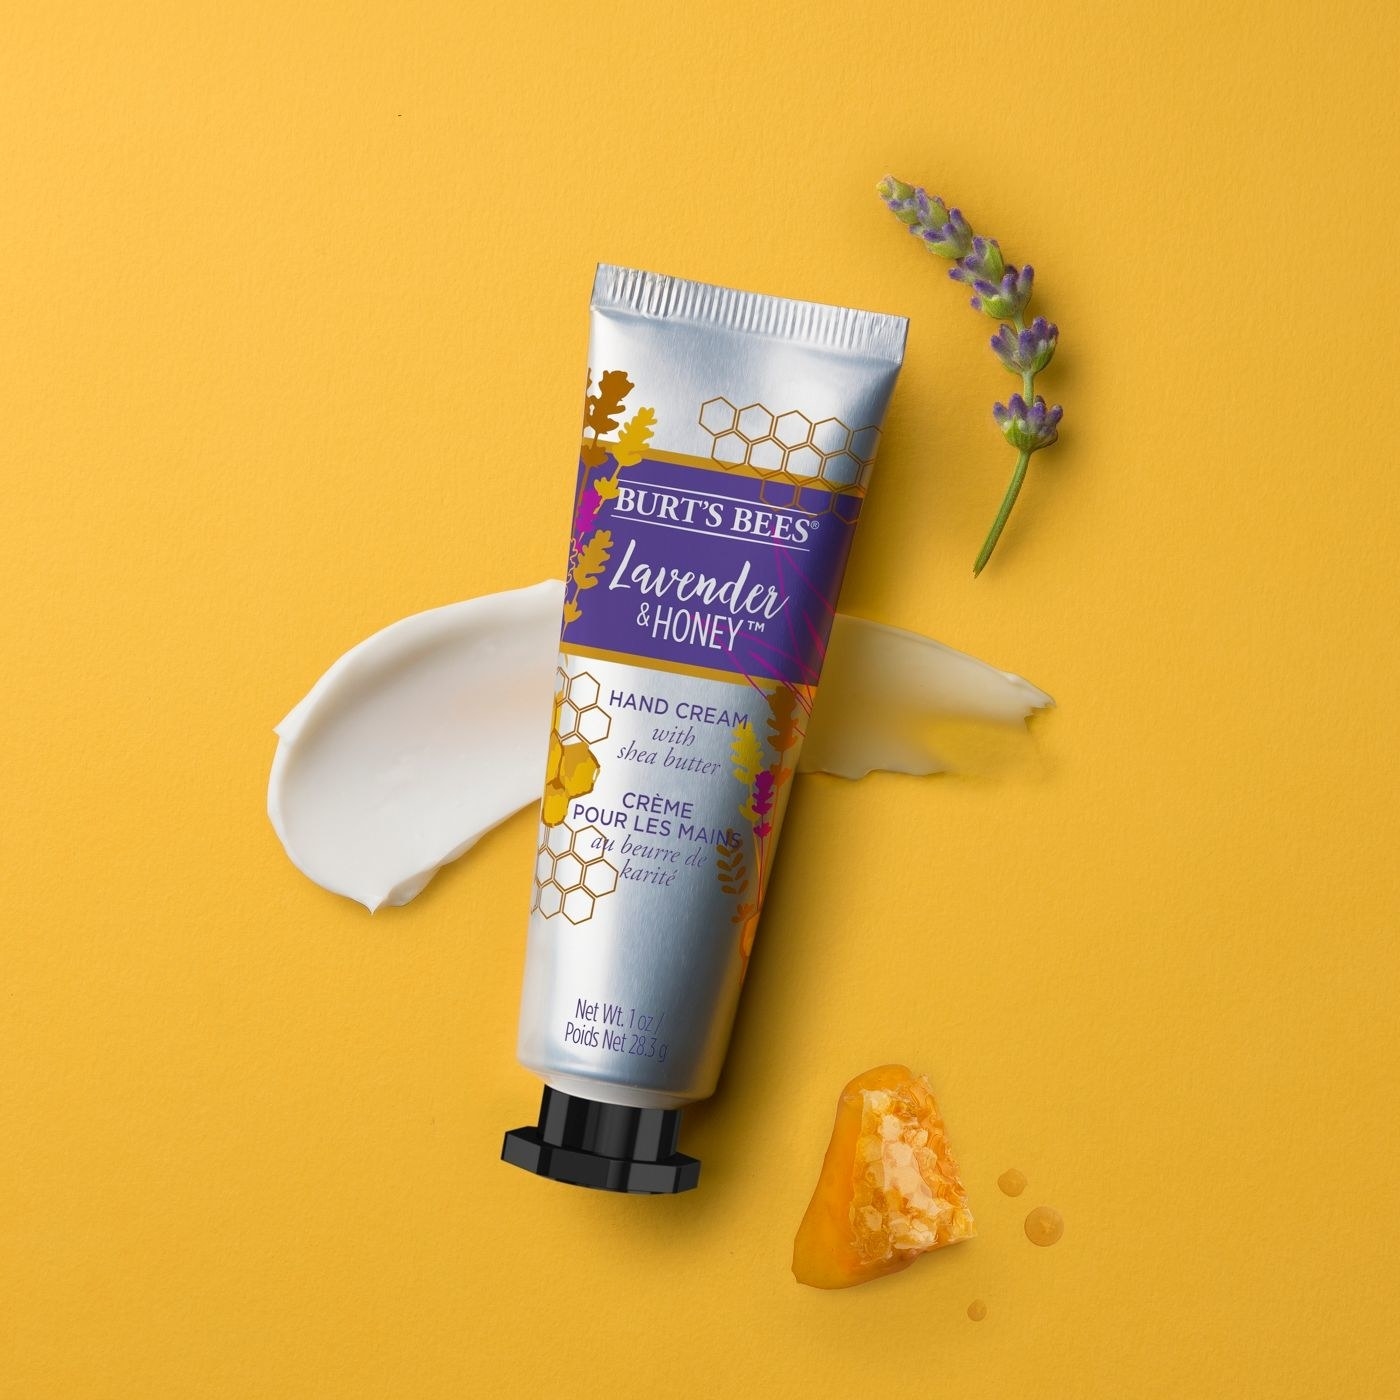 The tube of hand cream in front of a swatch of the product to show its texture and consistency